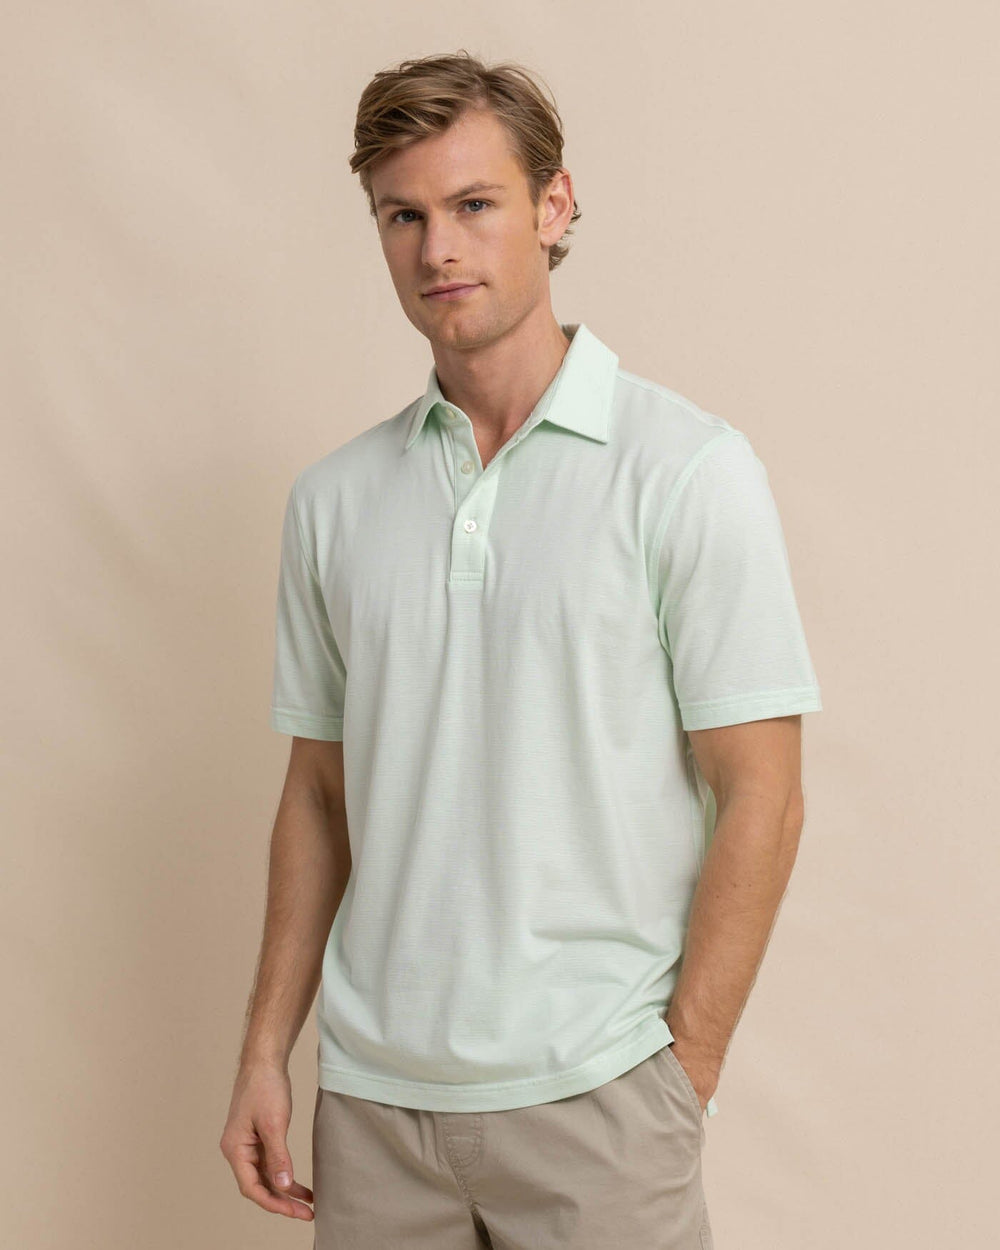 The front view of the Southern Tide The Seaport Davenport Stripe Polo by Southern Tide - Morning Mist Sage